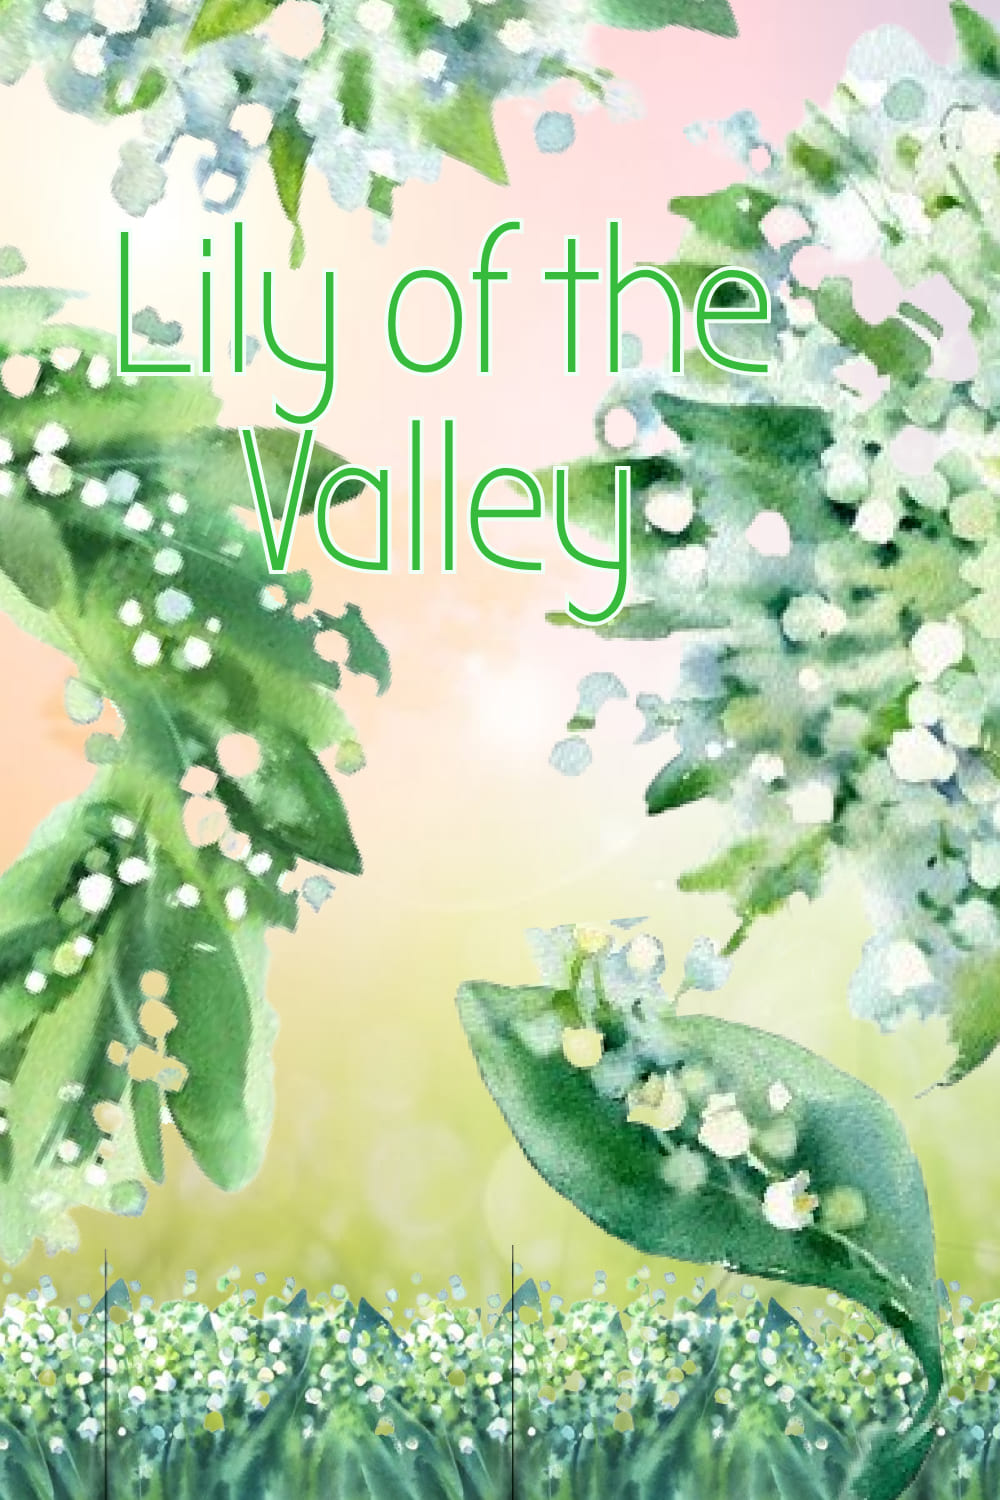 Lily of the Valley Watercolor - preview image.